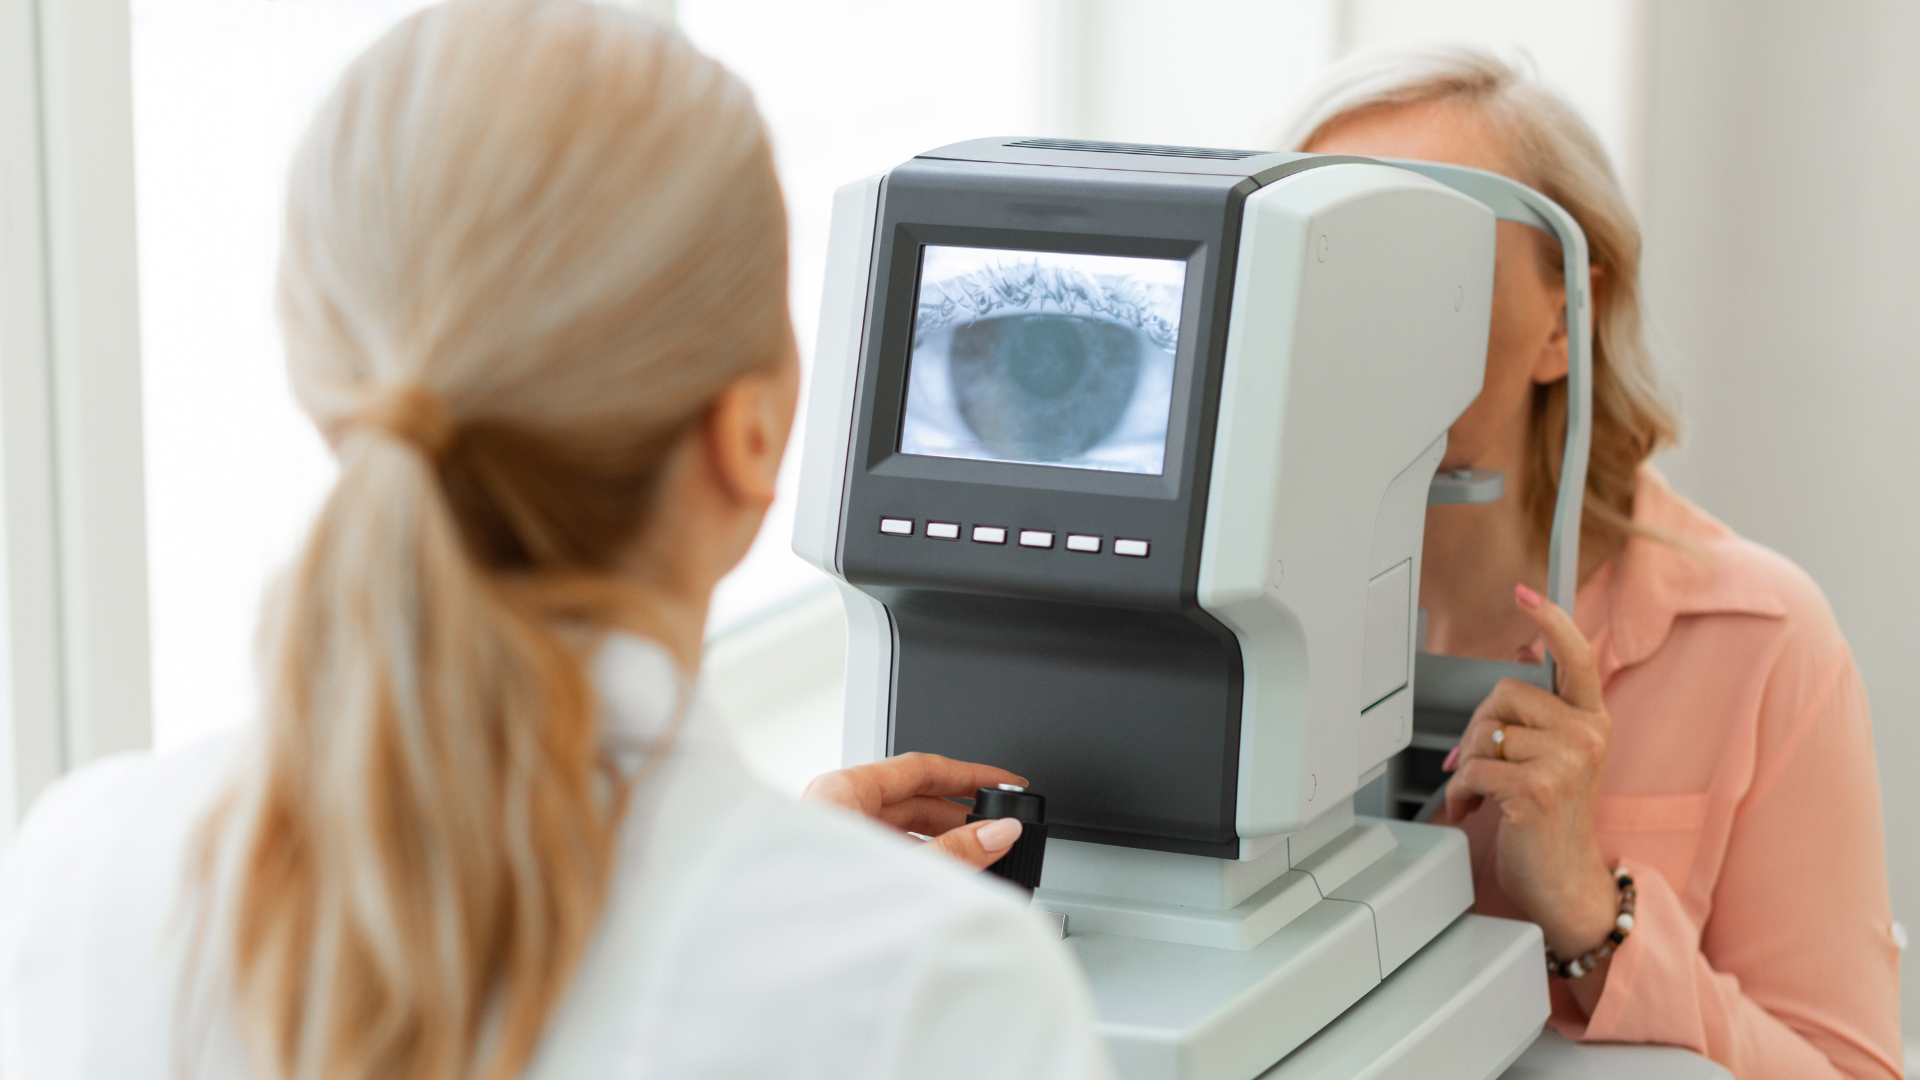 The Top 3 Benefits of Using Ophthalmic Image Management Software